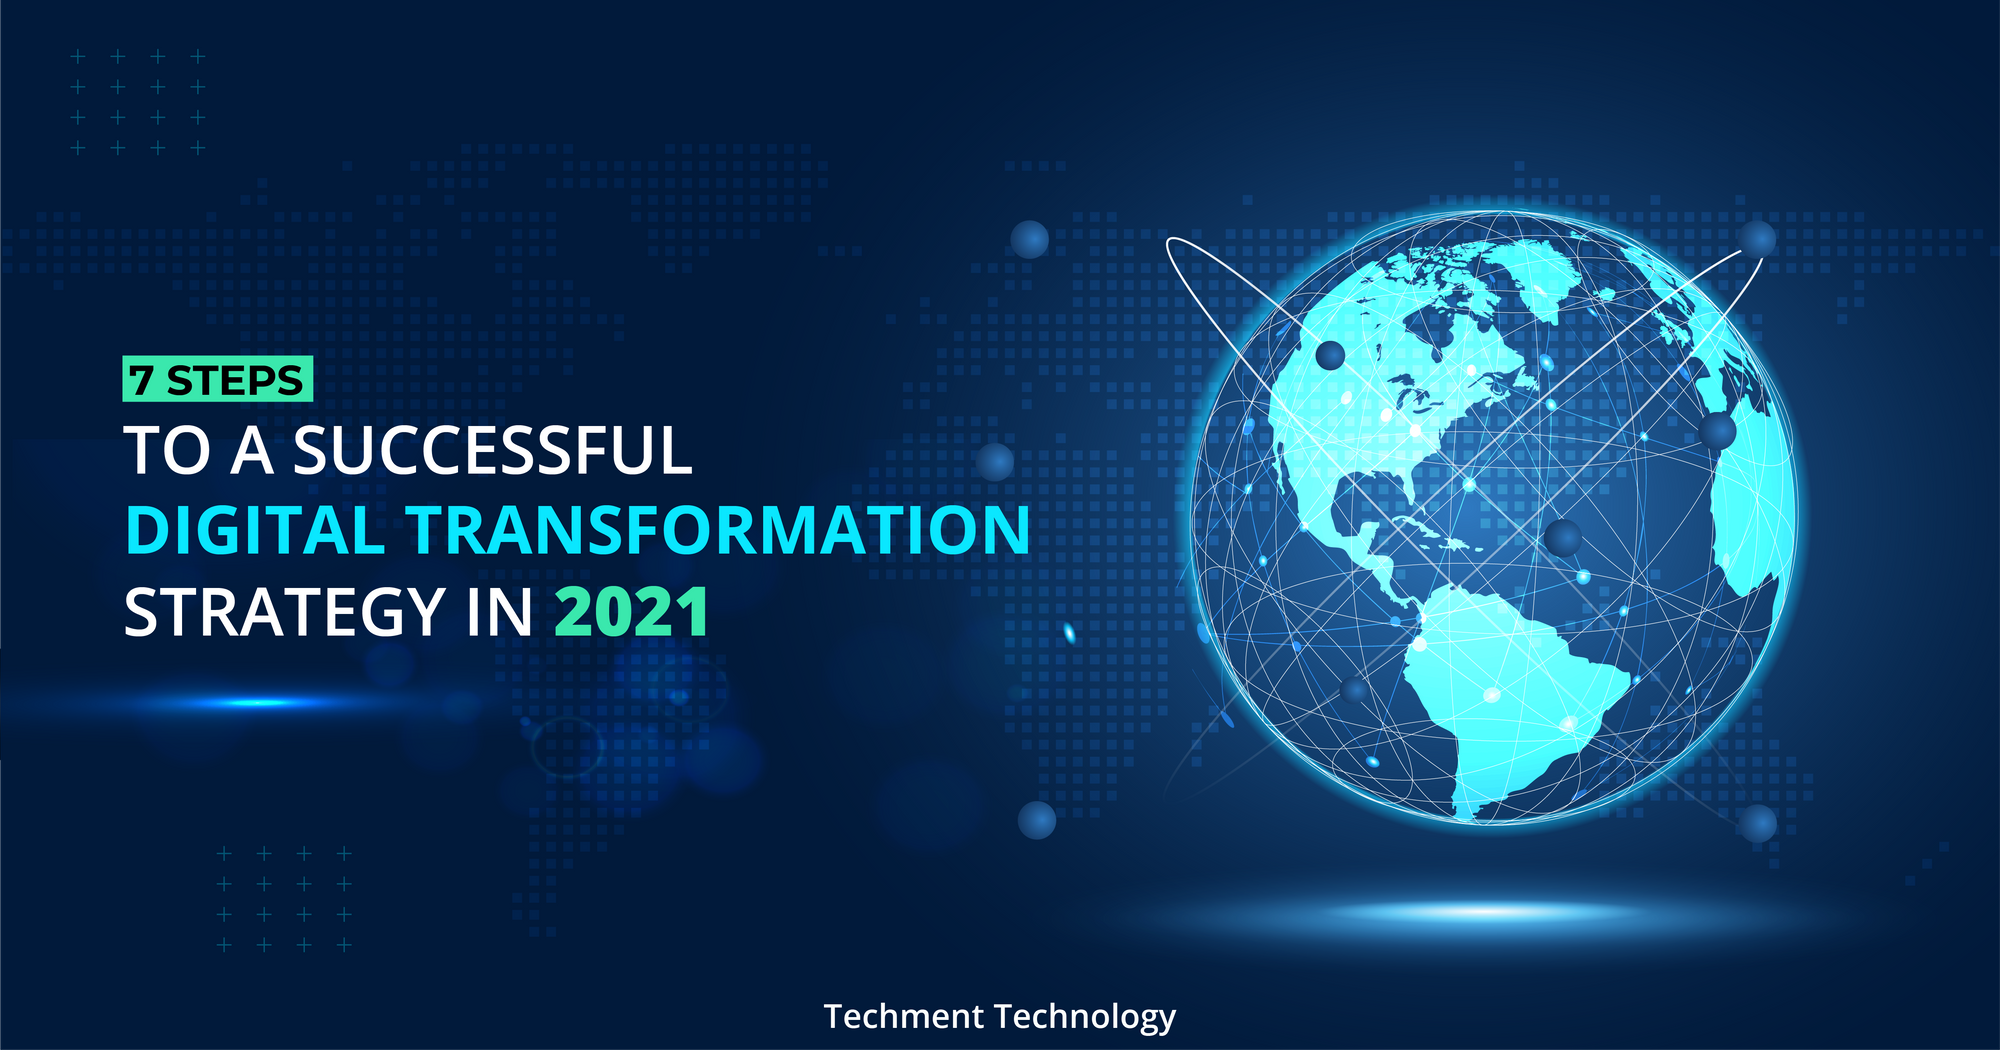 7 Steps To A Successful Digital Transformation Strategy in 2021